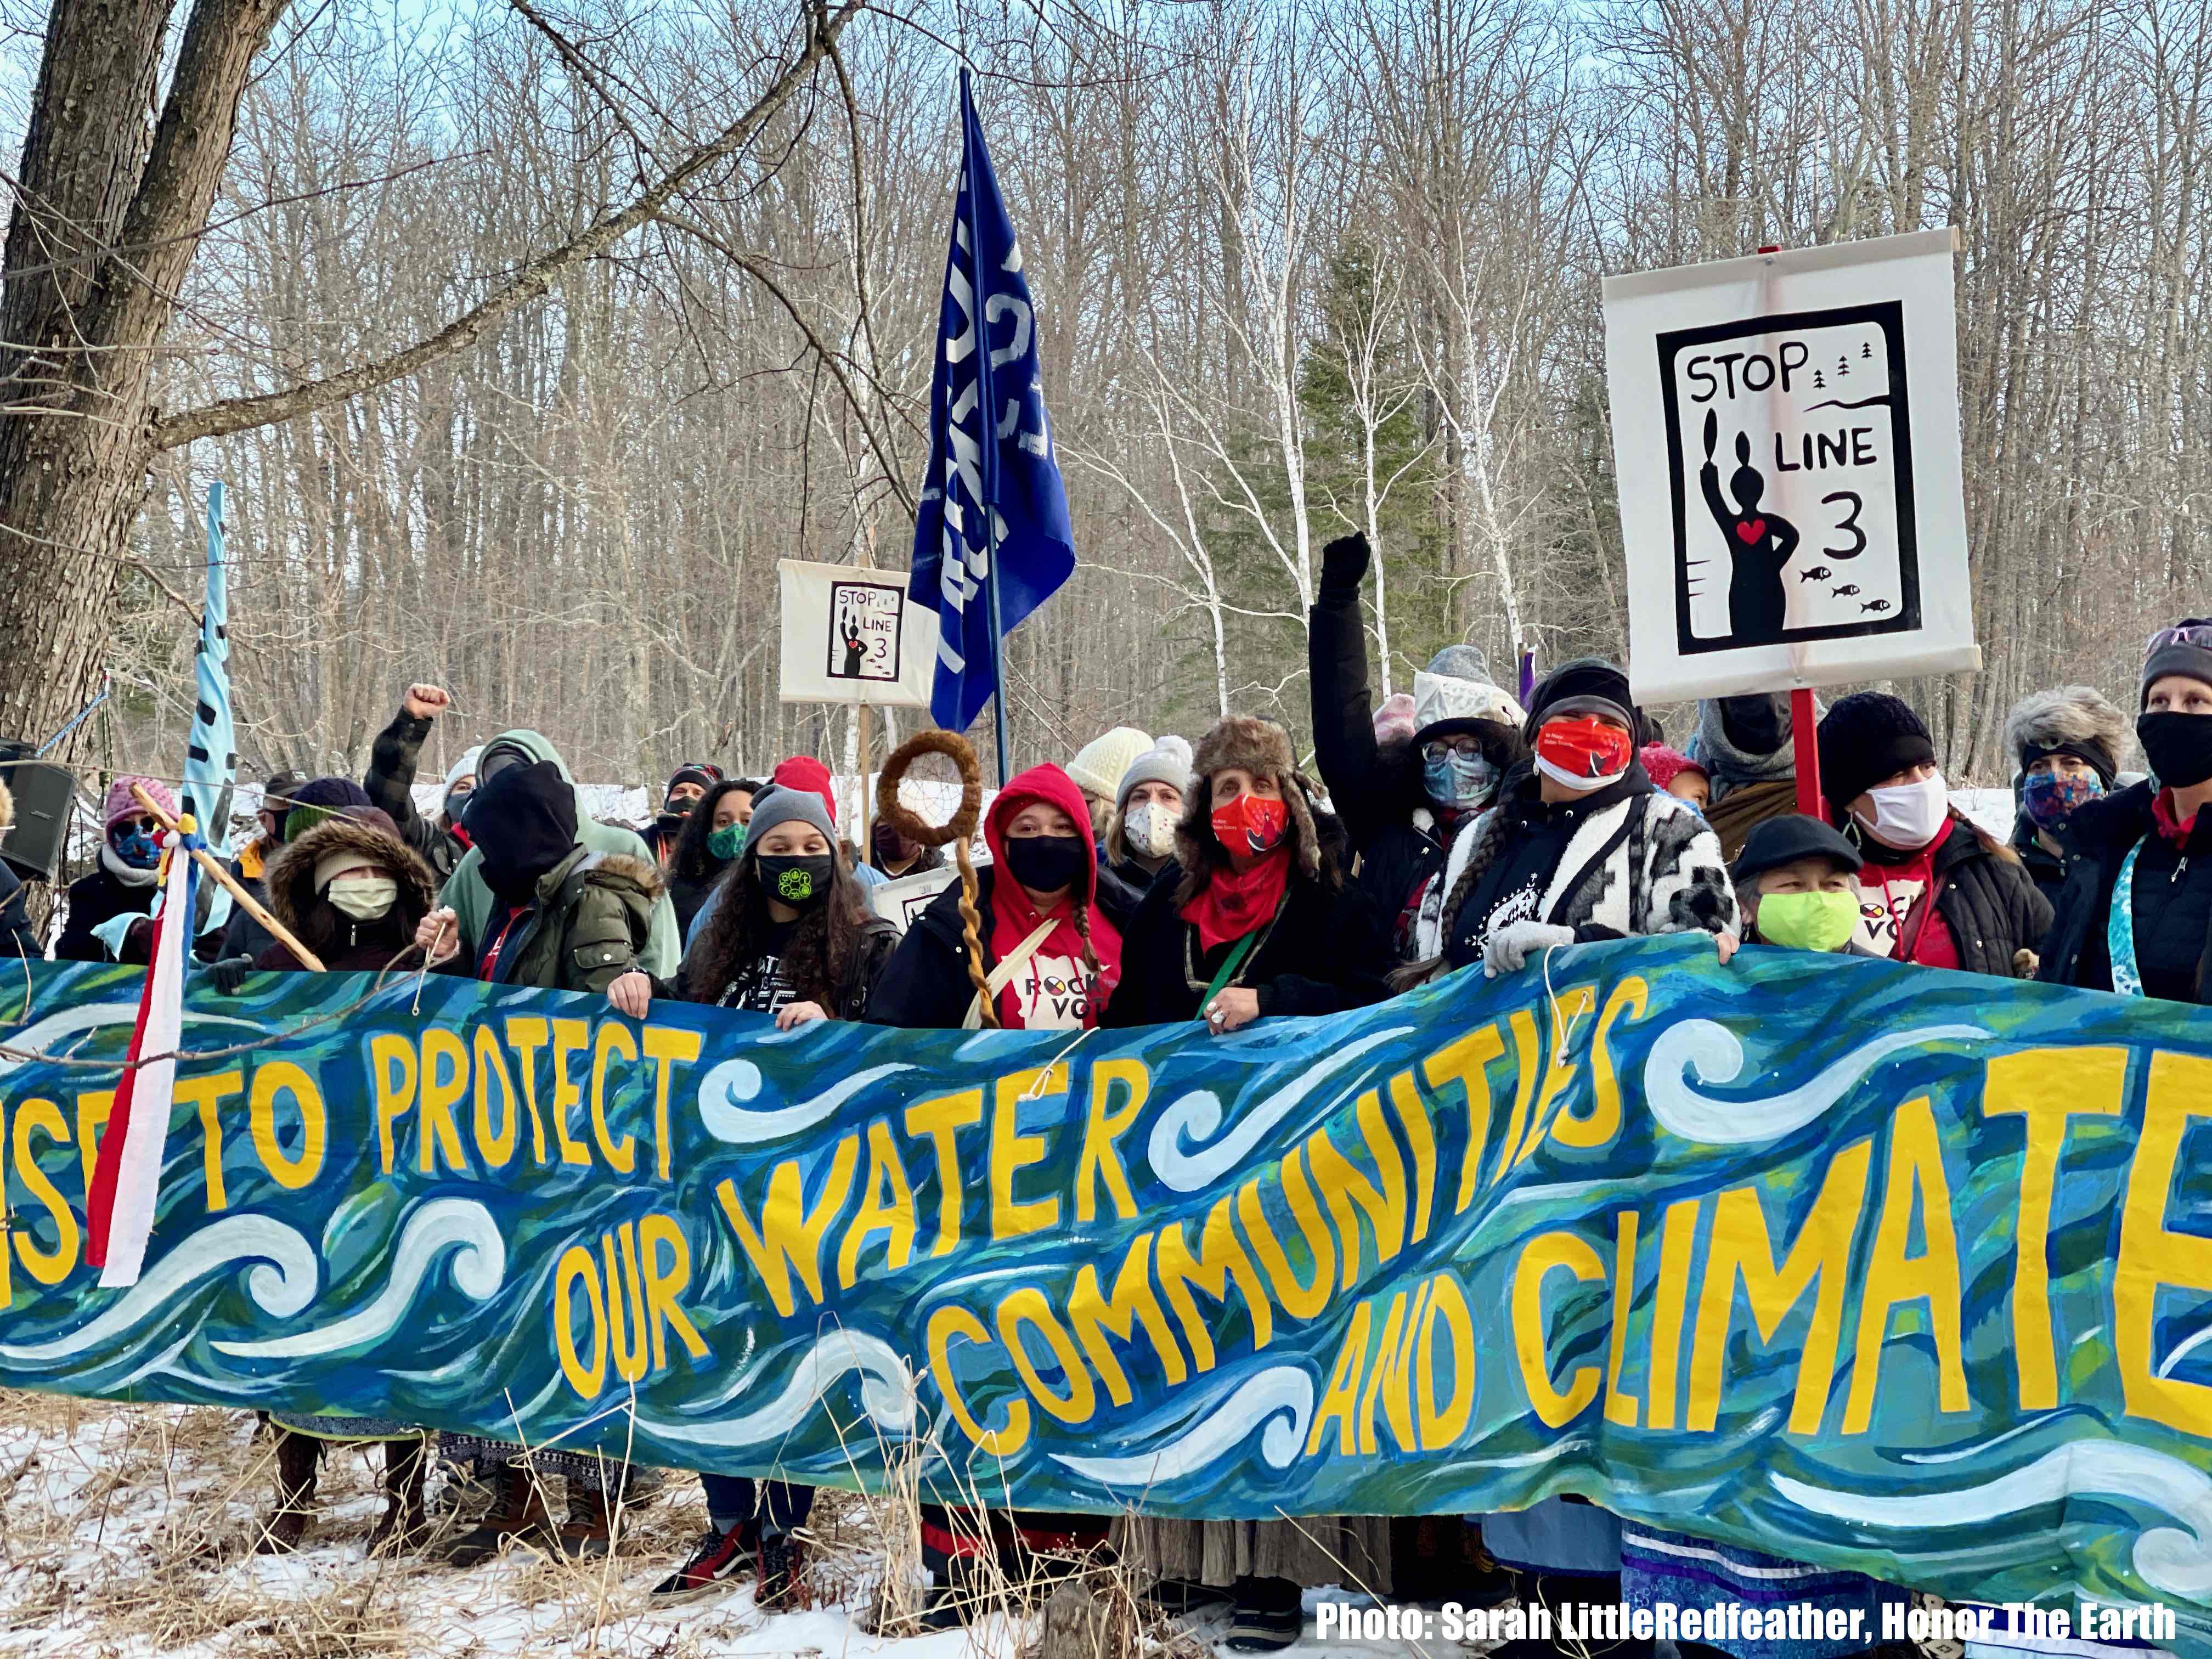 Over 350 Groups Urge President Biden to Stop the Line 3 Pipeline and Protect Indigenous Rights, Climate